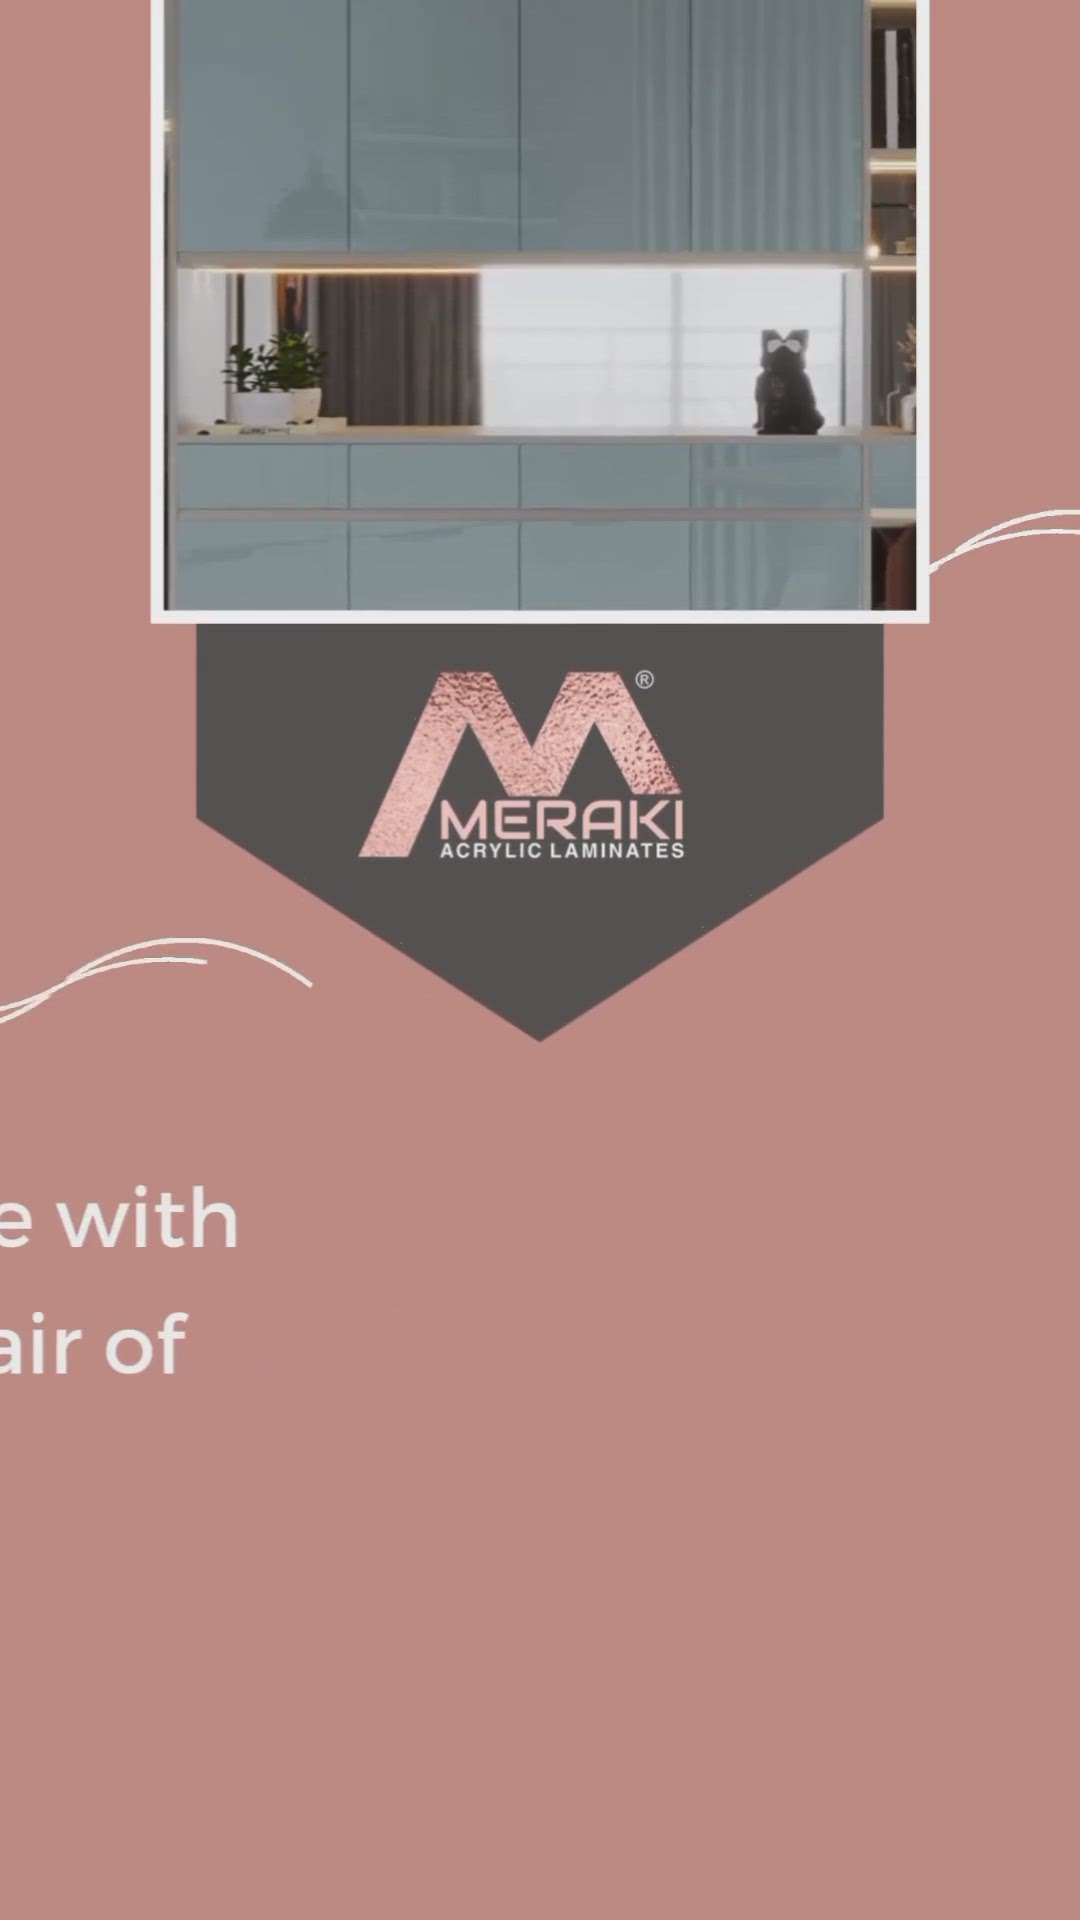 Elevate with Meraki Acrylic Laminates 🌟Enhance your vibrancy and space with our glossy surfaces that never fade.
For enquiries contact 7907805100

 #MERAKI #Acrylic #acryliclamintes #glossykitchen #KitchenIdeas #InteriorDesigner #KitchenInterior